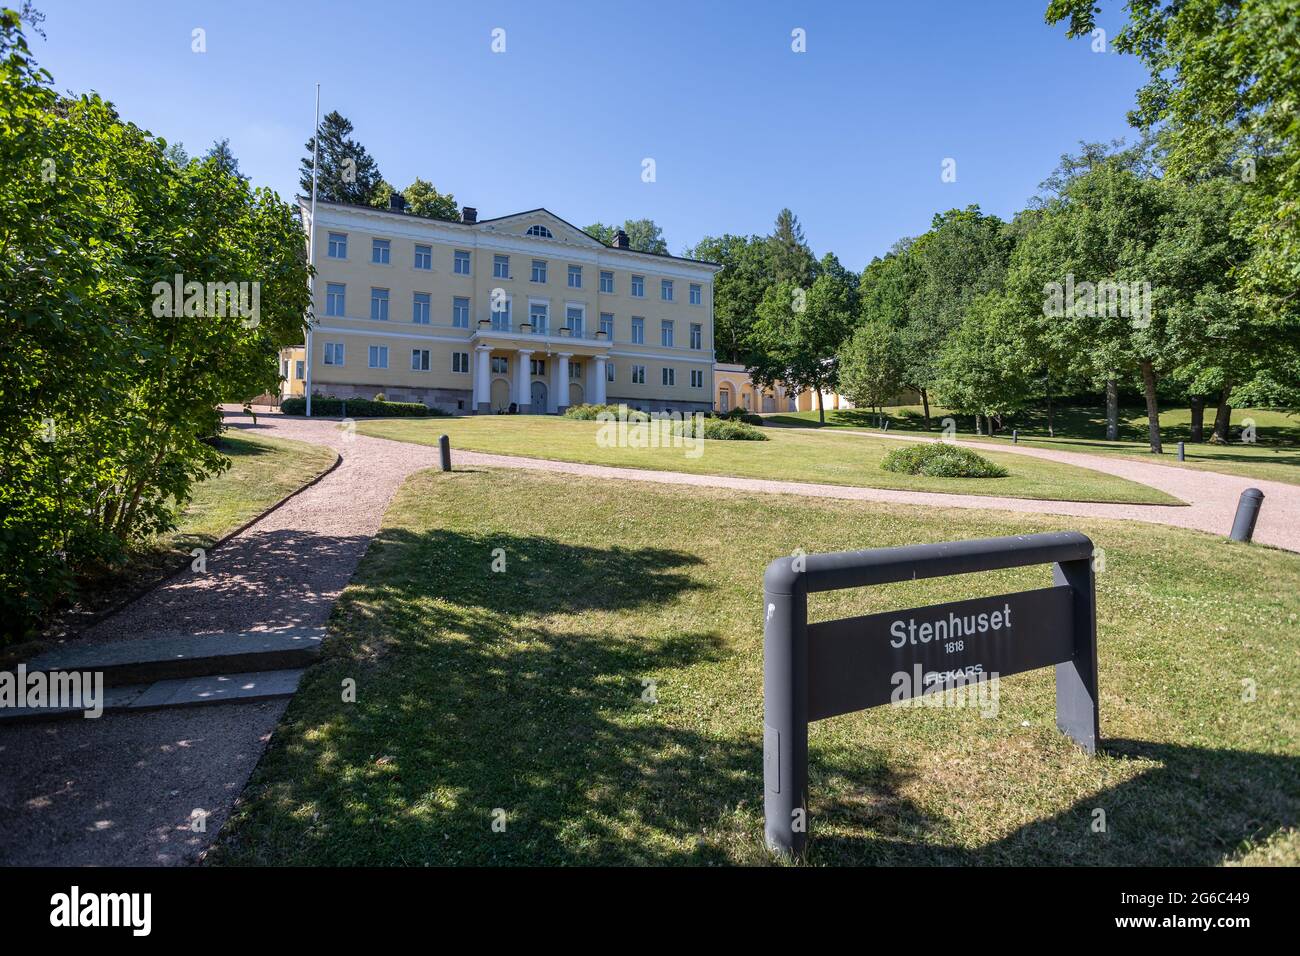 The Manor house or Stenhuset in Fiskars village, a historical ironworks area and popular travel destination. Stock Photo